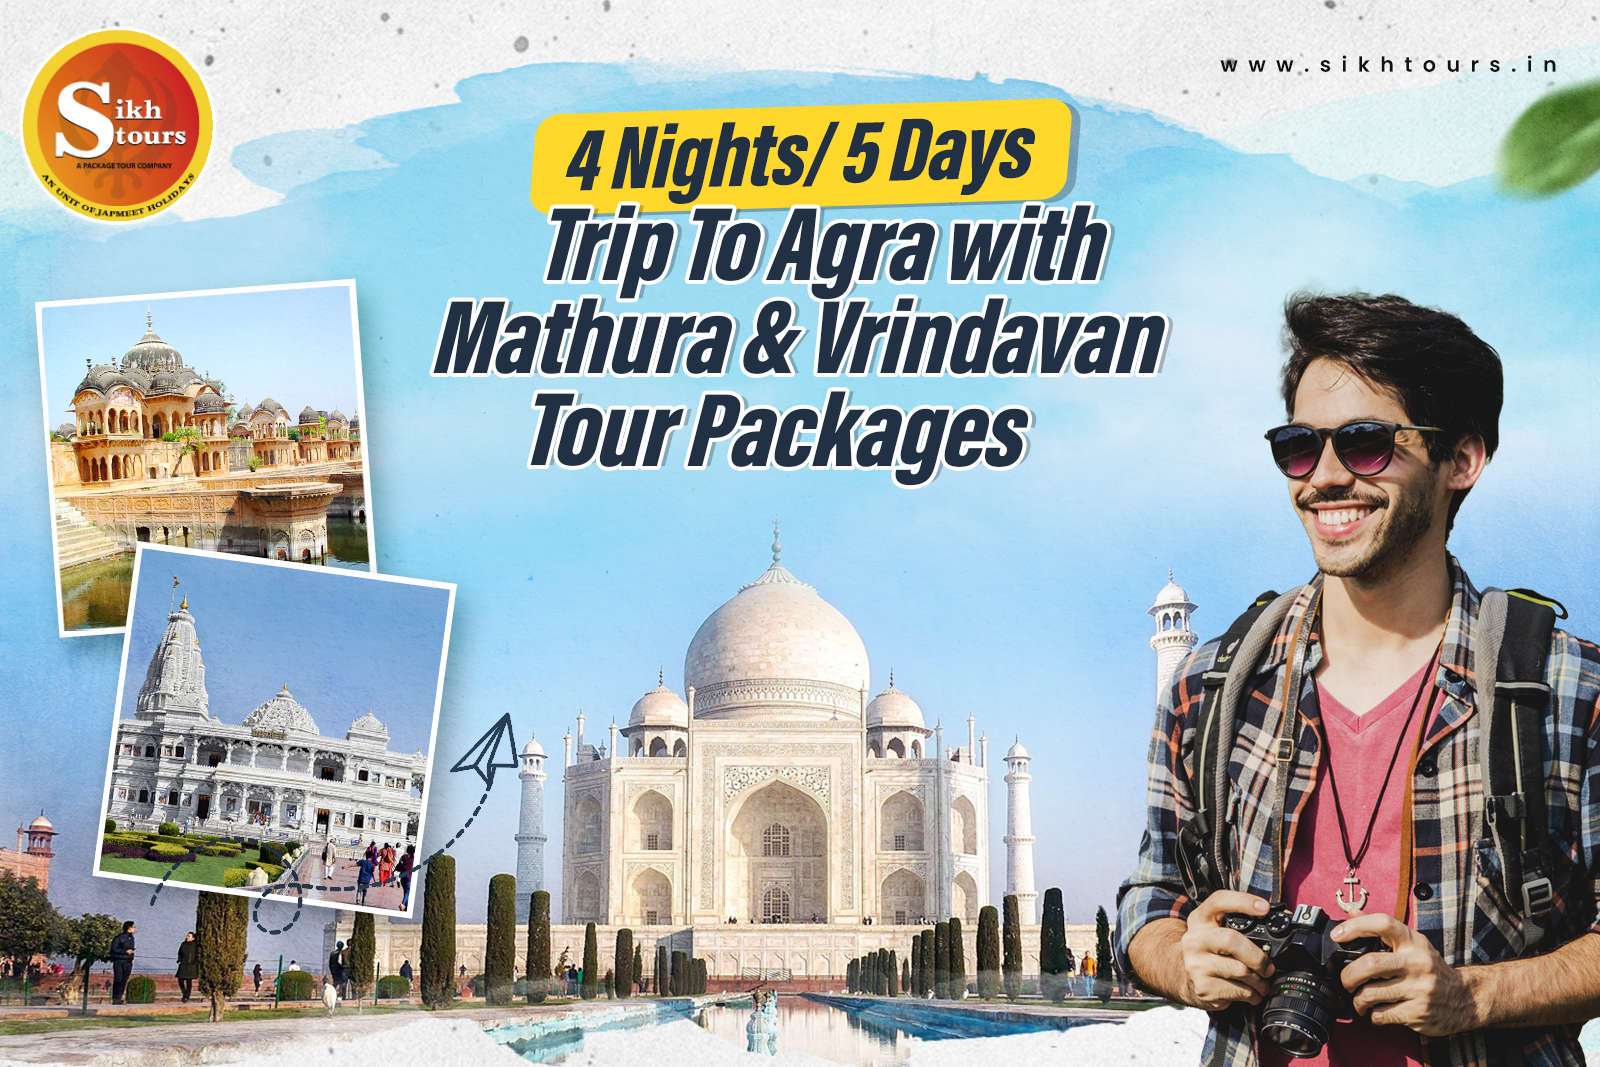 4 Nights/ 5 Days Trip To Agra with Mathura and Vrindavan Tour Packages